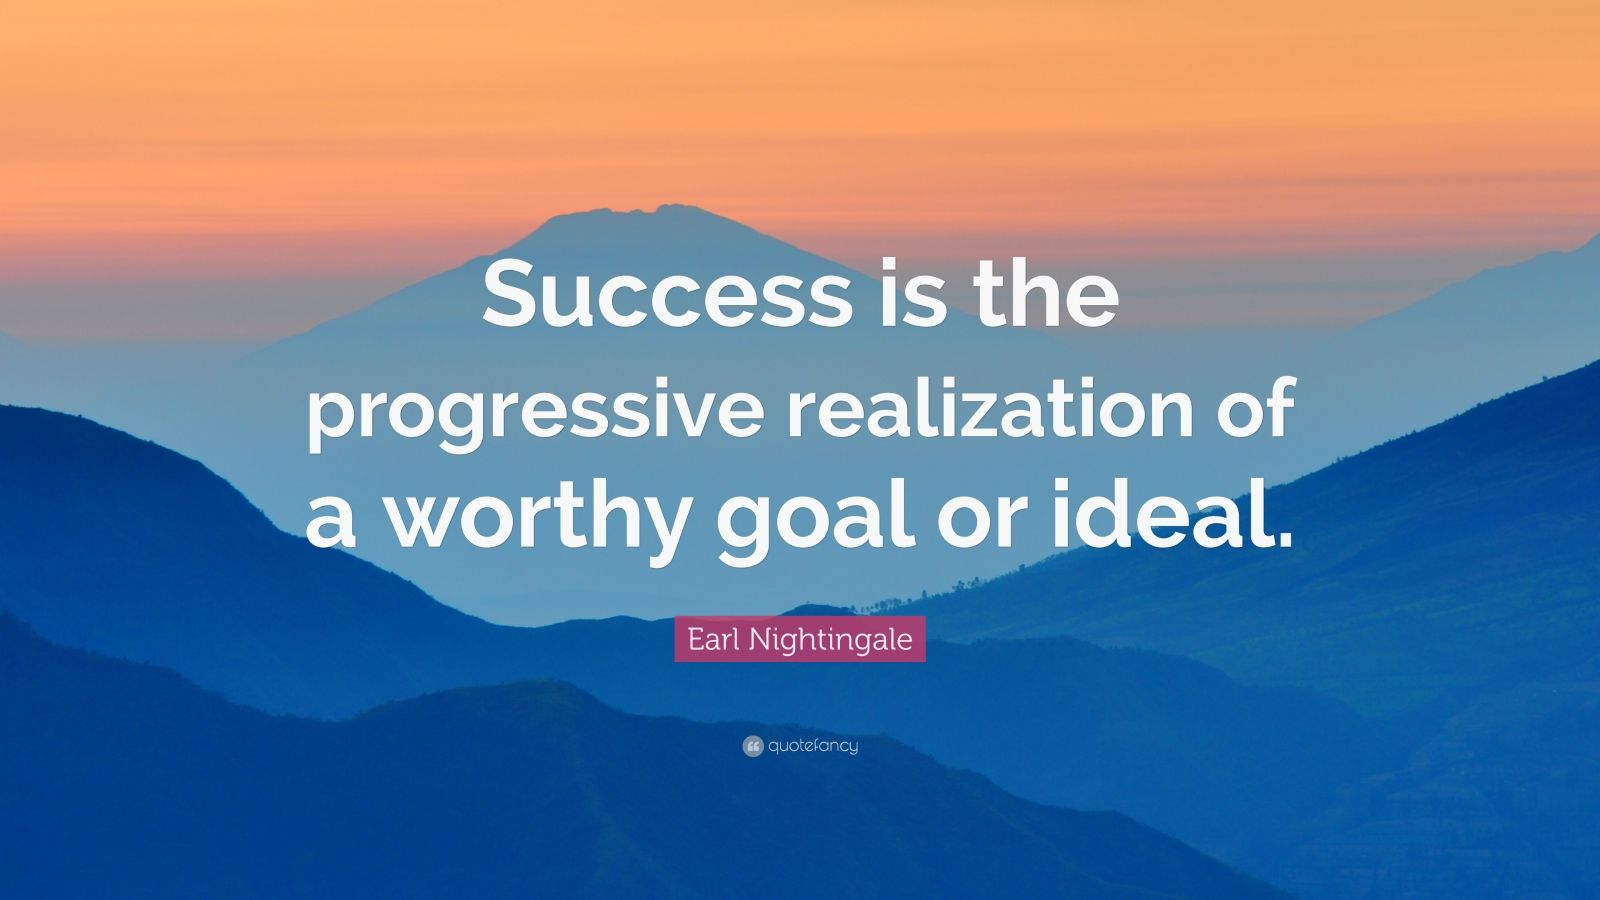 Earl Nightingale Quote: “Success is the progressive realization of a ...